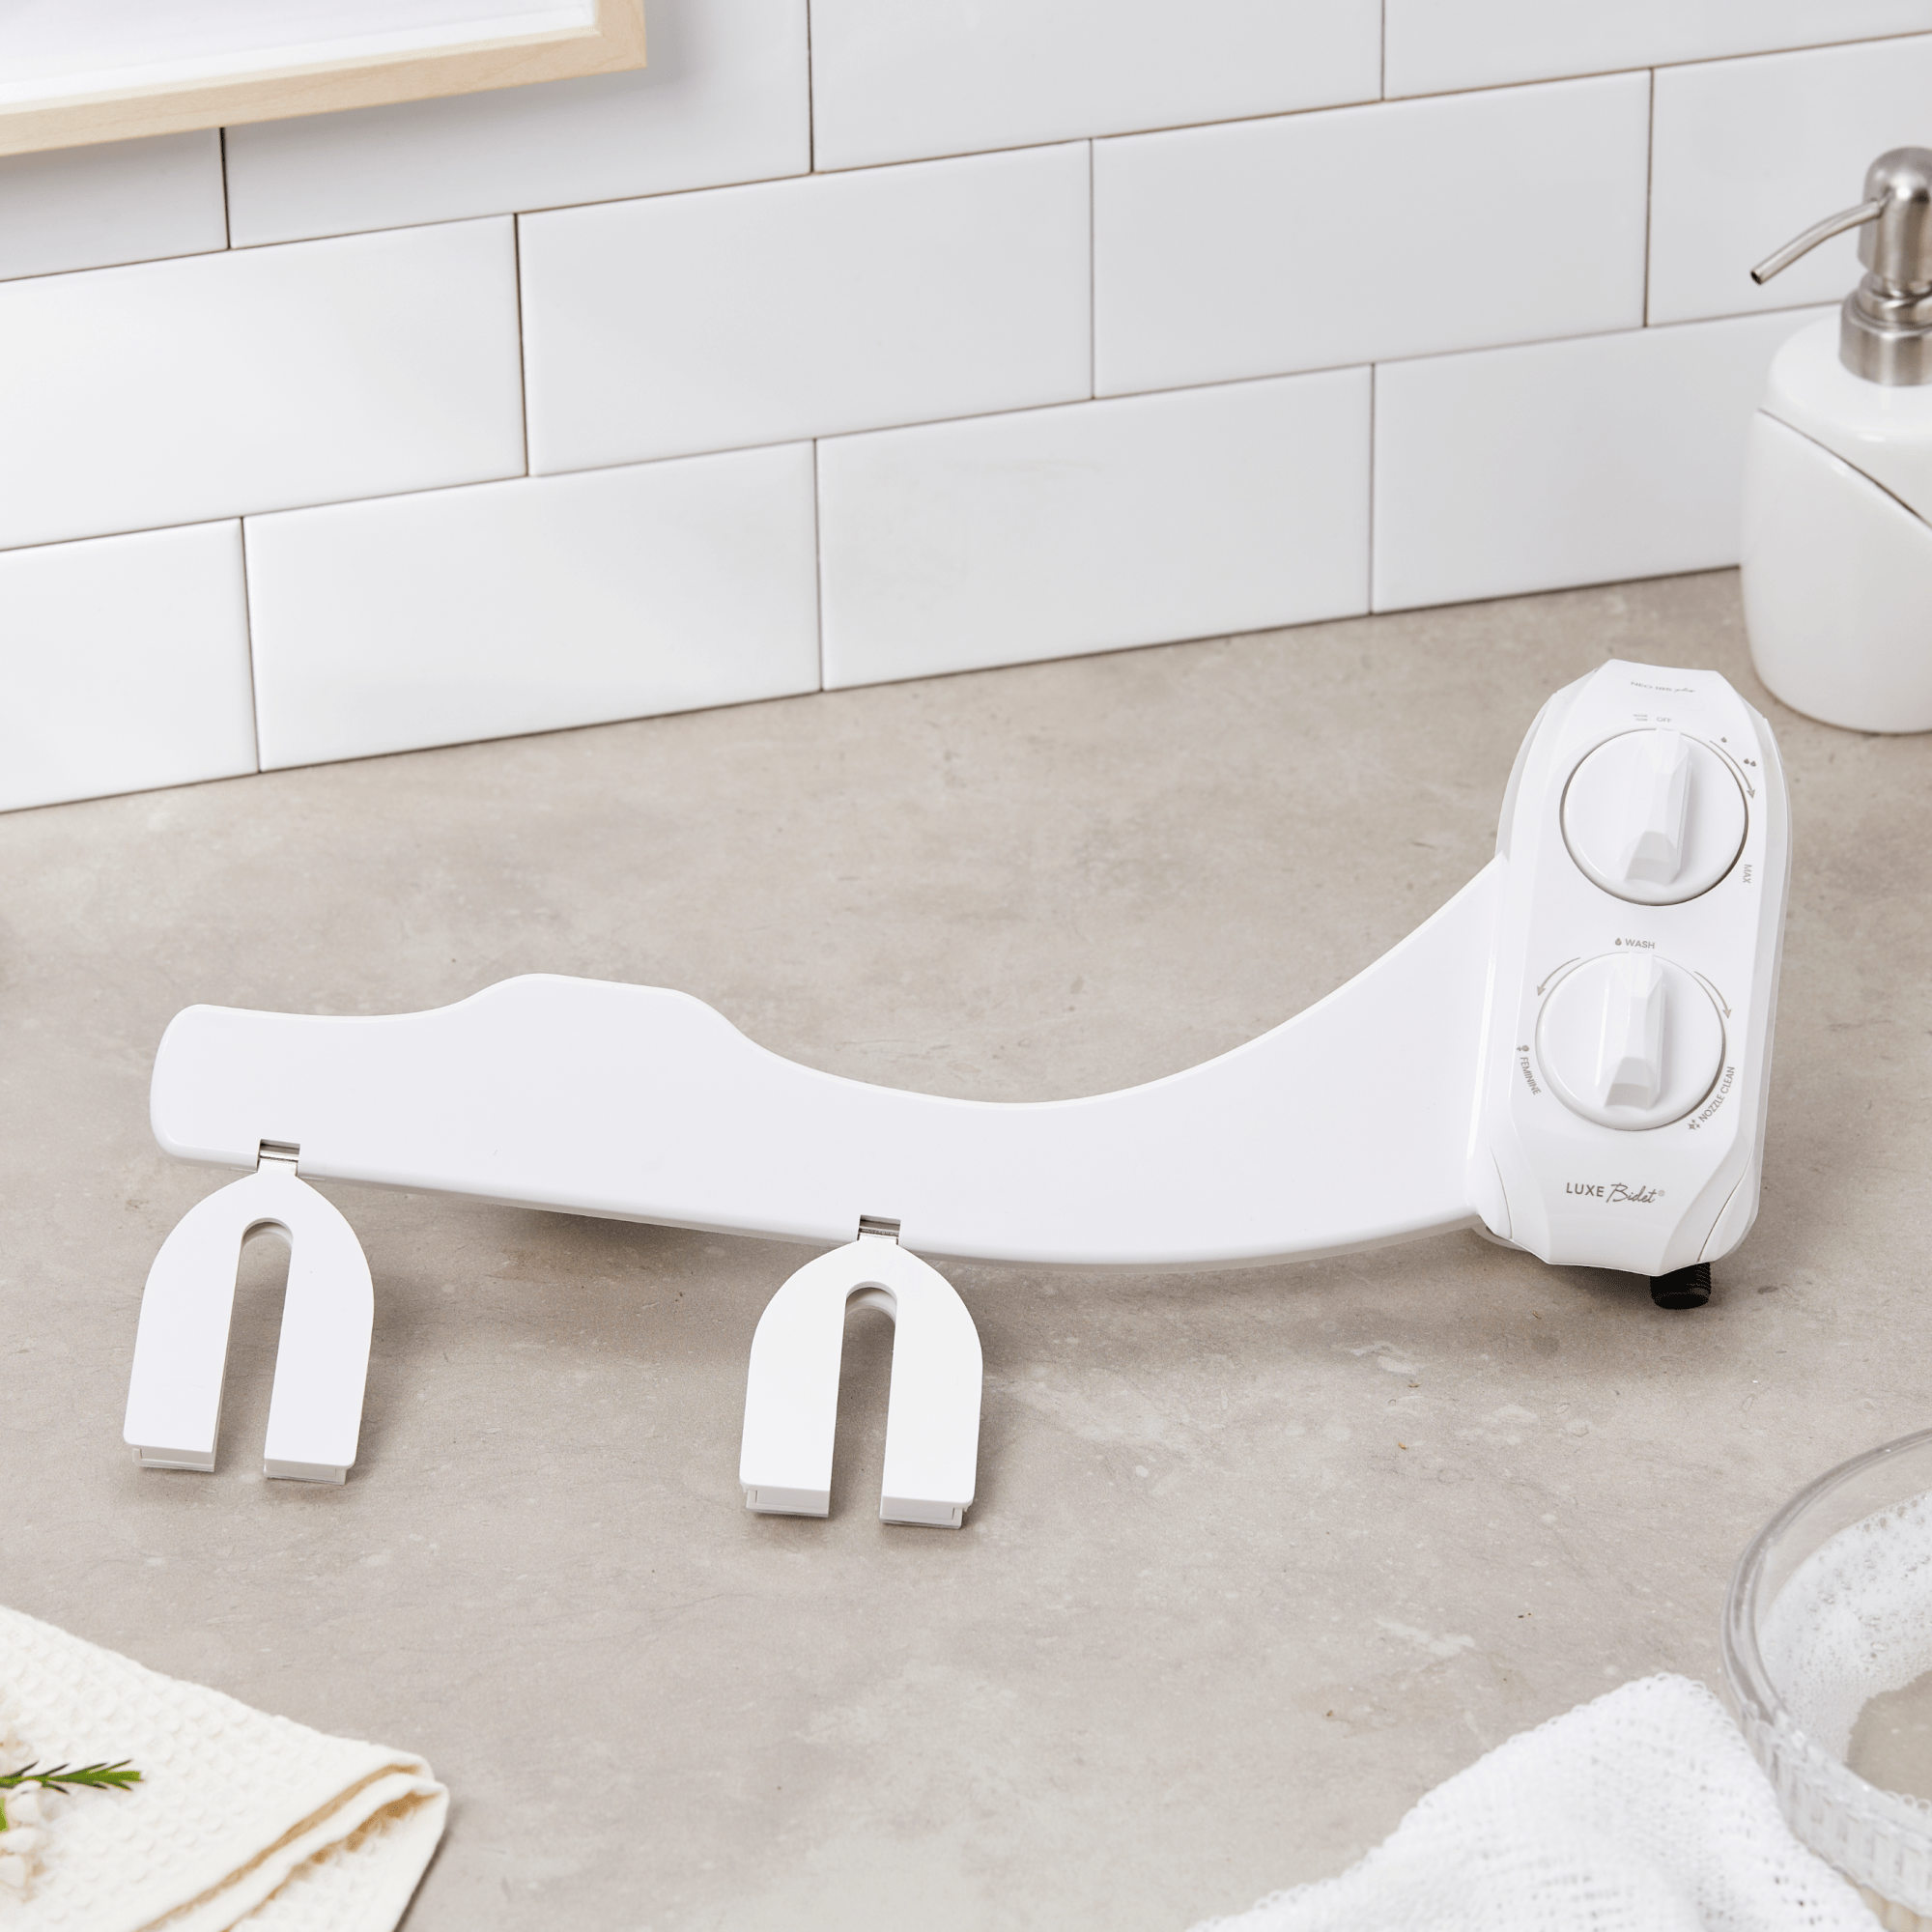 NEO 185 Plus: Imperfect Packaging - NEO 185 Plus White propped up to see entire bidet body